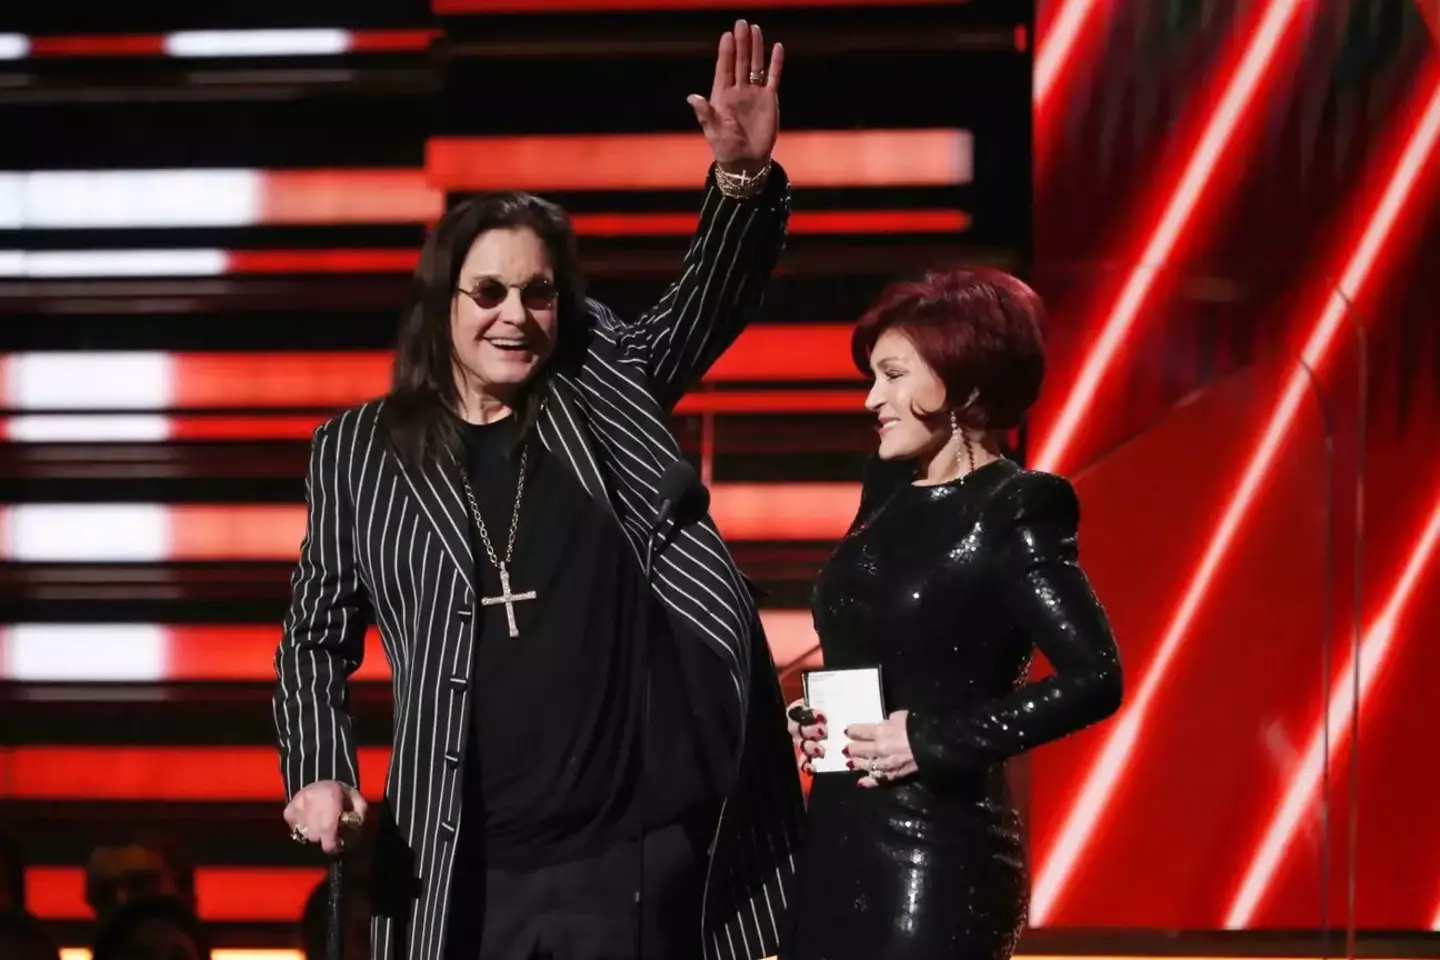 Ozzy and Sharon Osbourne have been married for nearly 40 years.